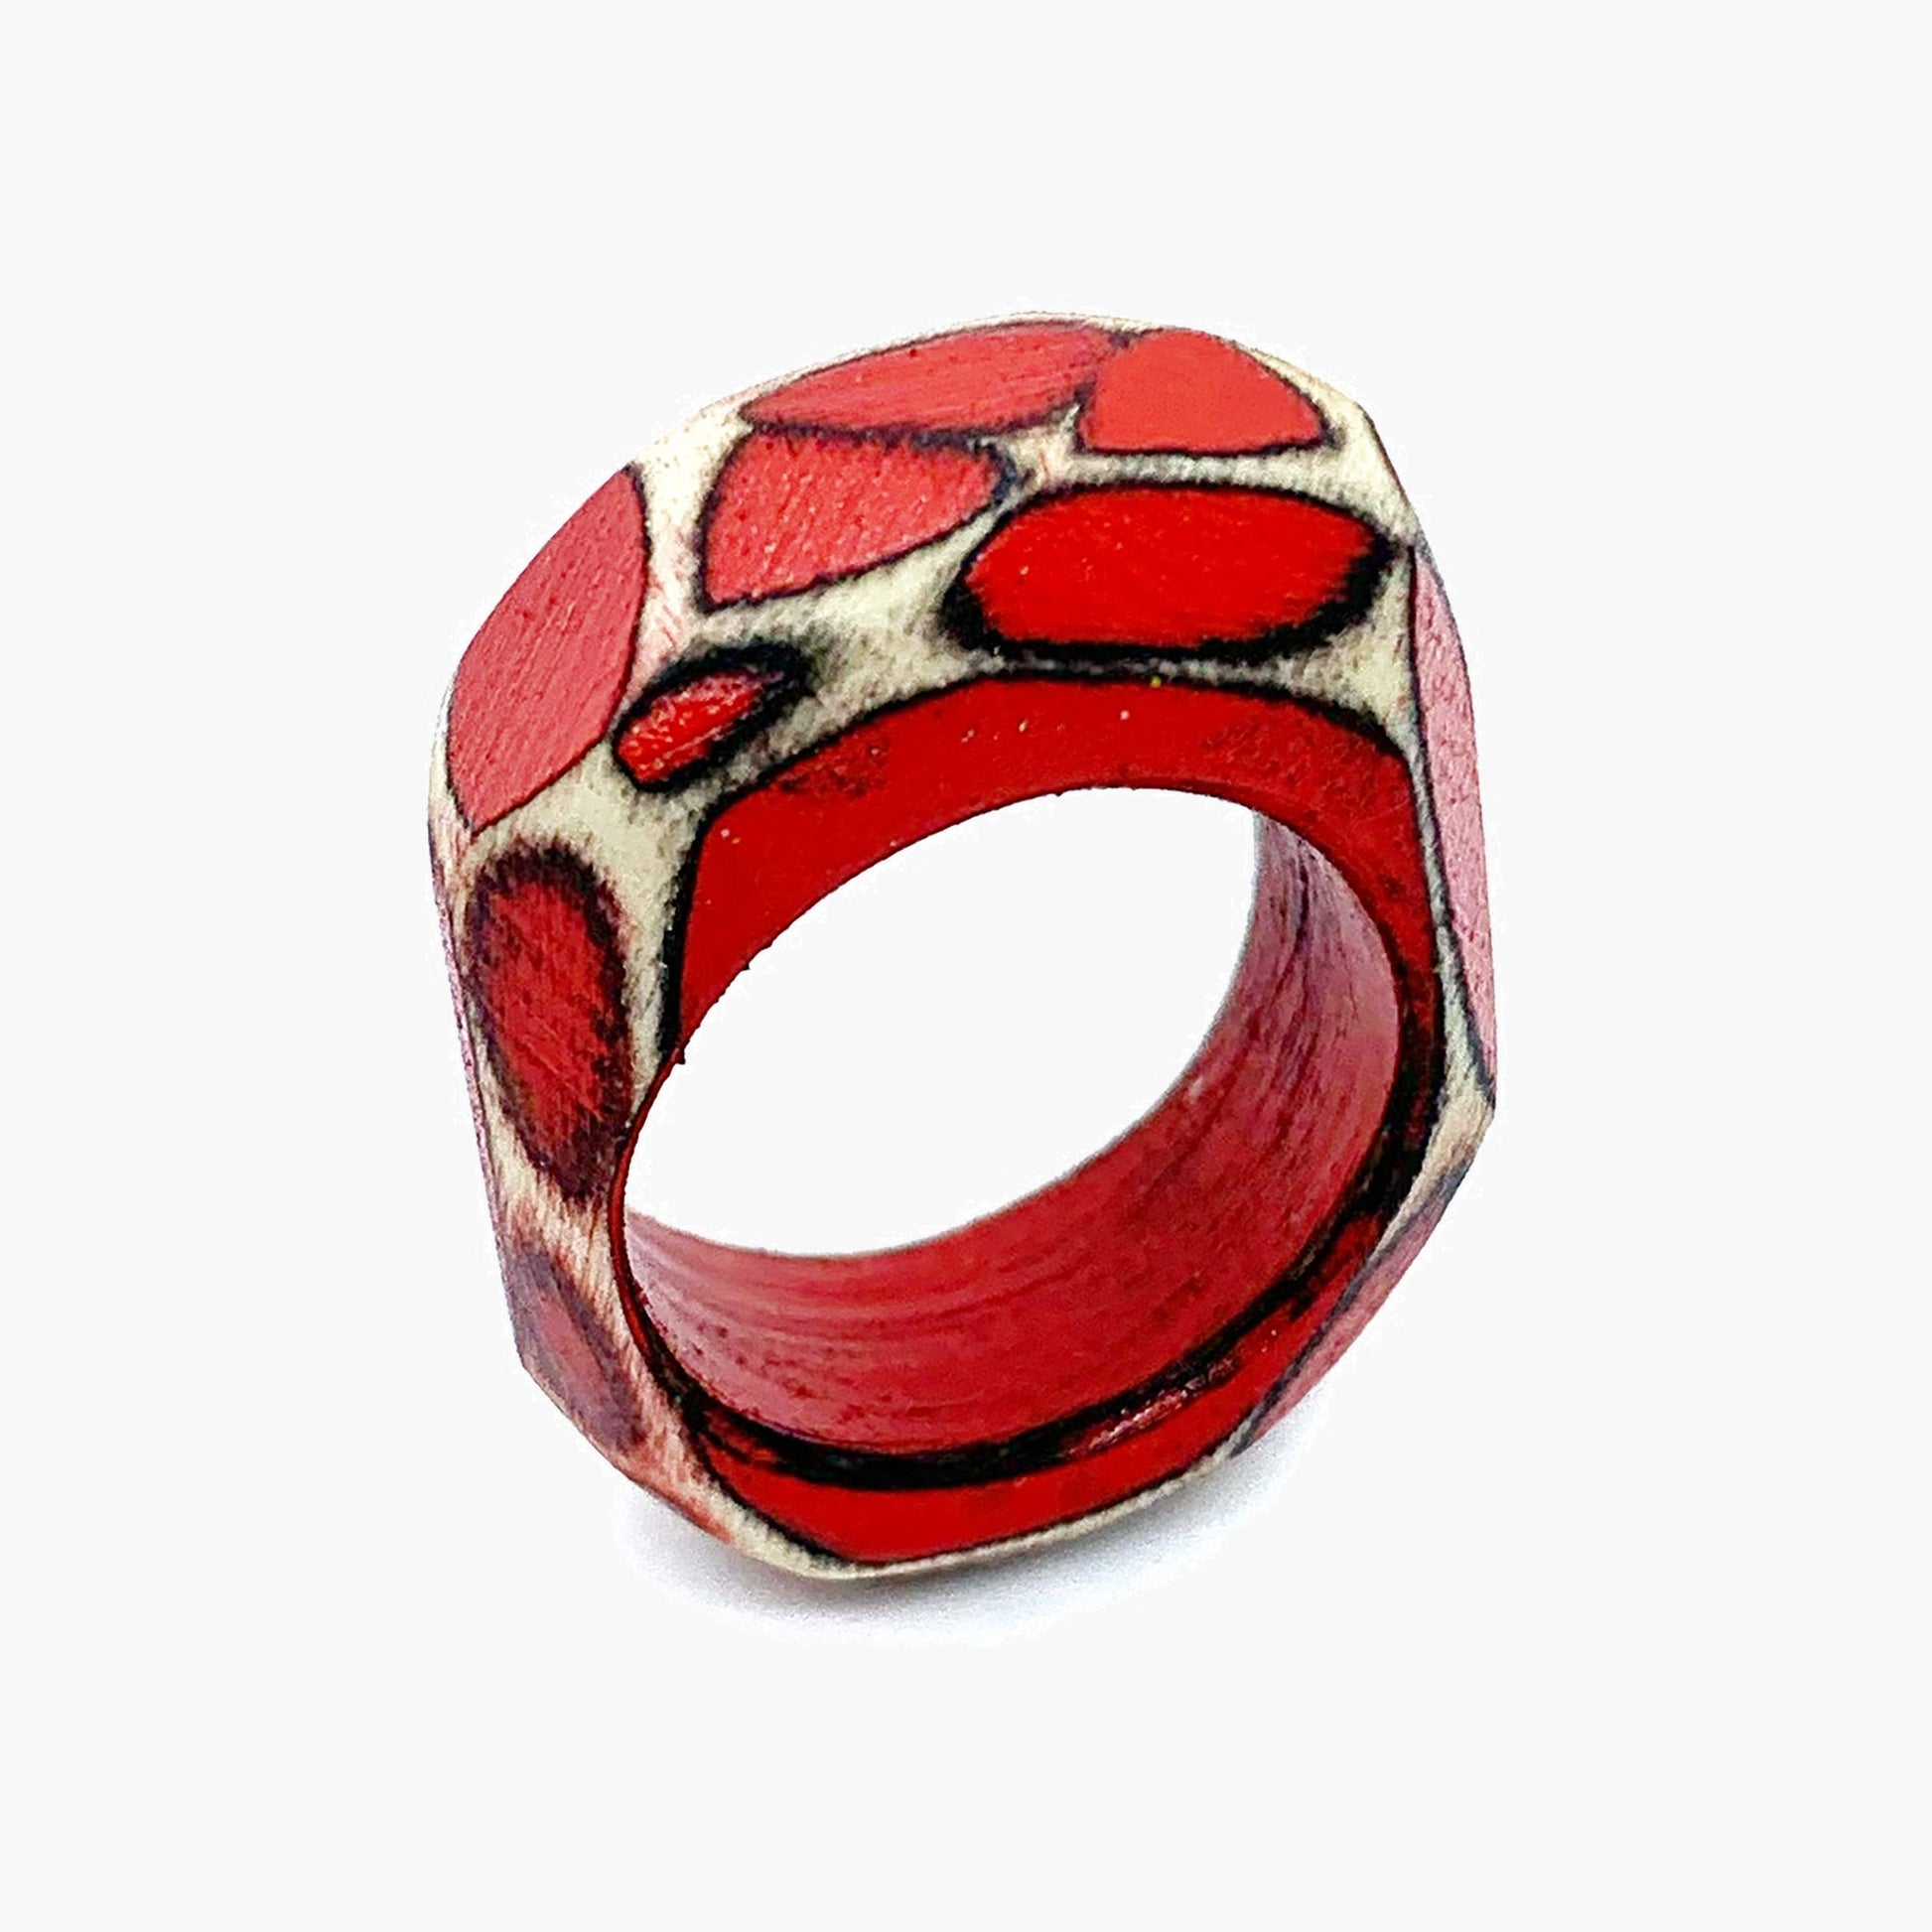 Red wooden multifaceted ring by Morgan Hill